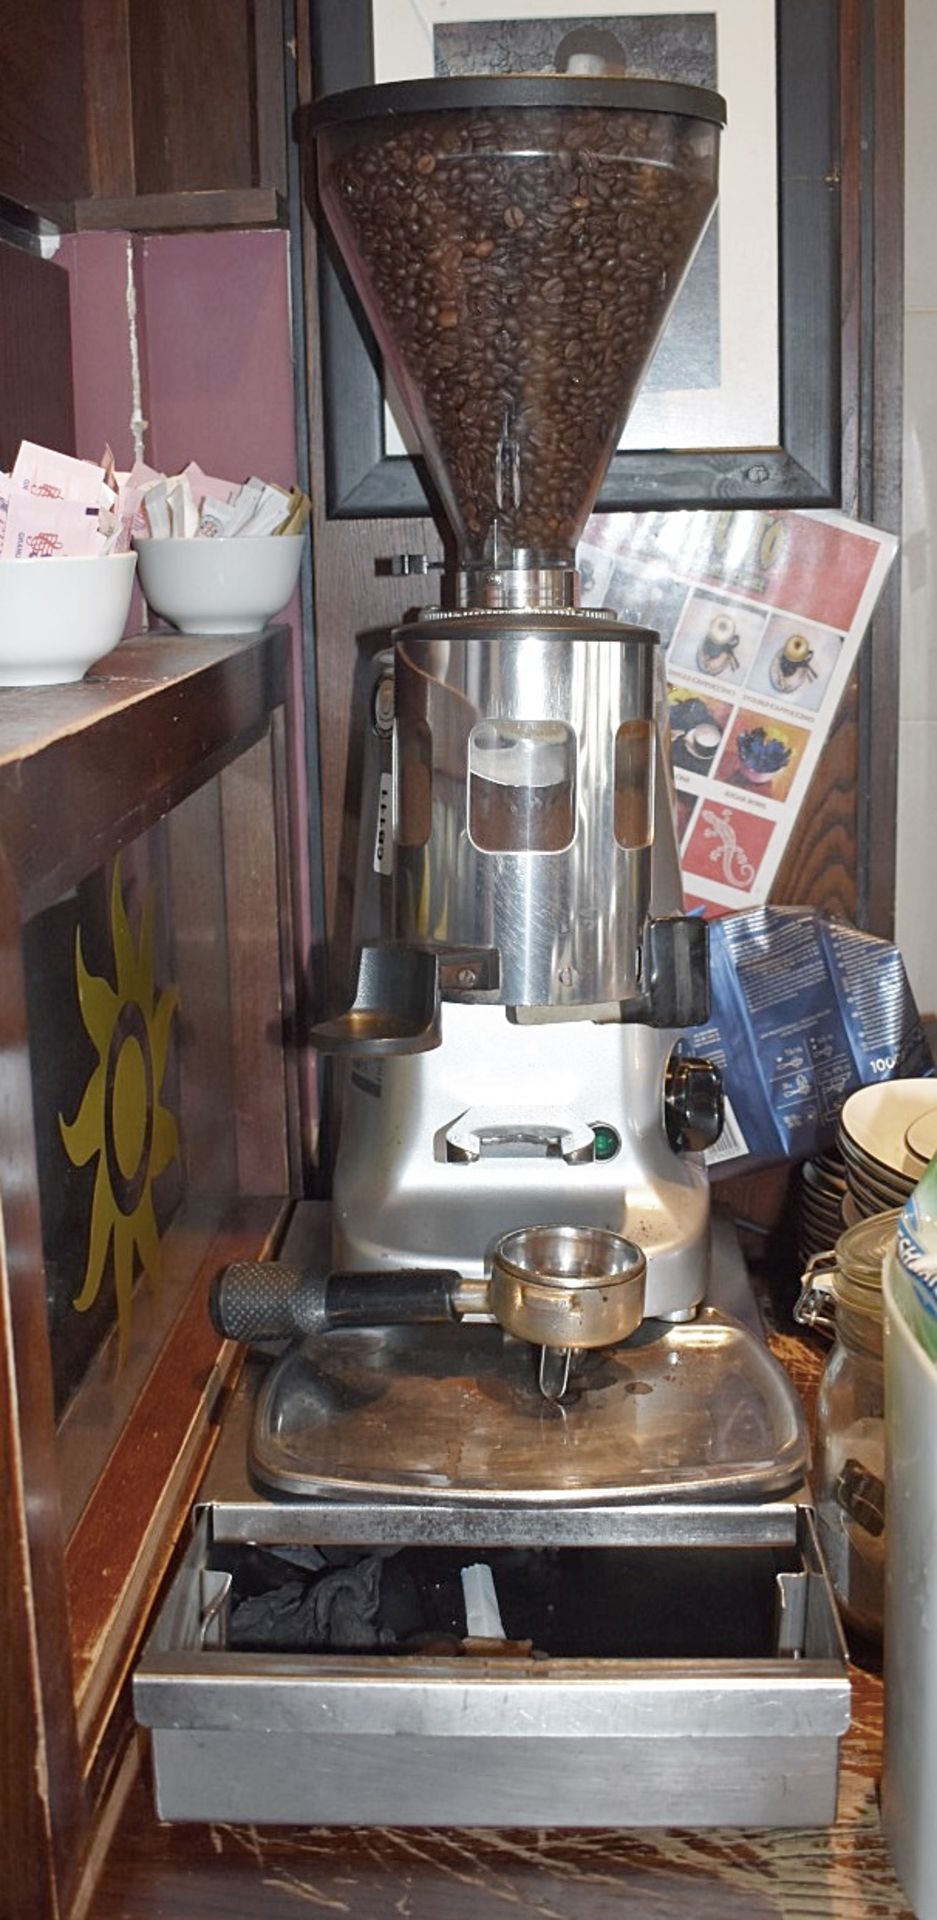 1 x Mazzer Luigi Super Jolly Automatic Coffee Grinder - Ref: CB111 GF - CL420 - From a Popular - Image 2 of 3